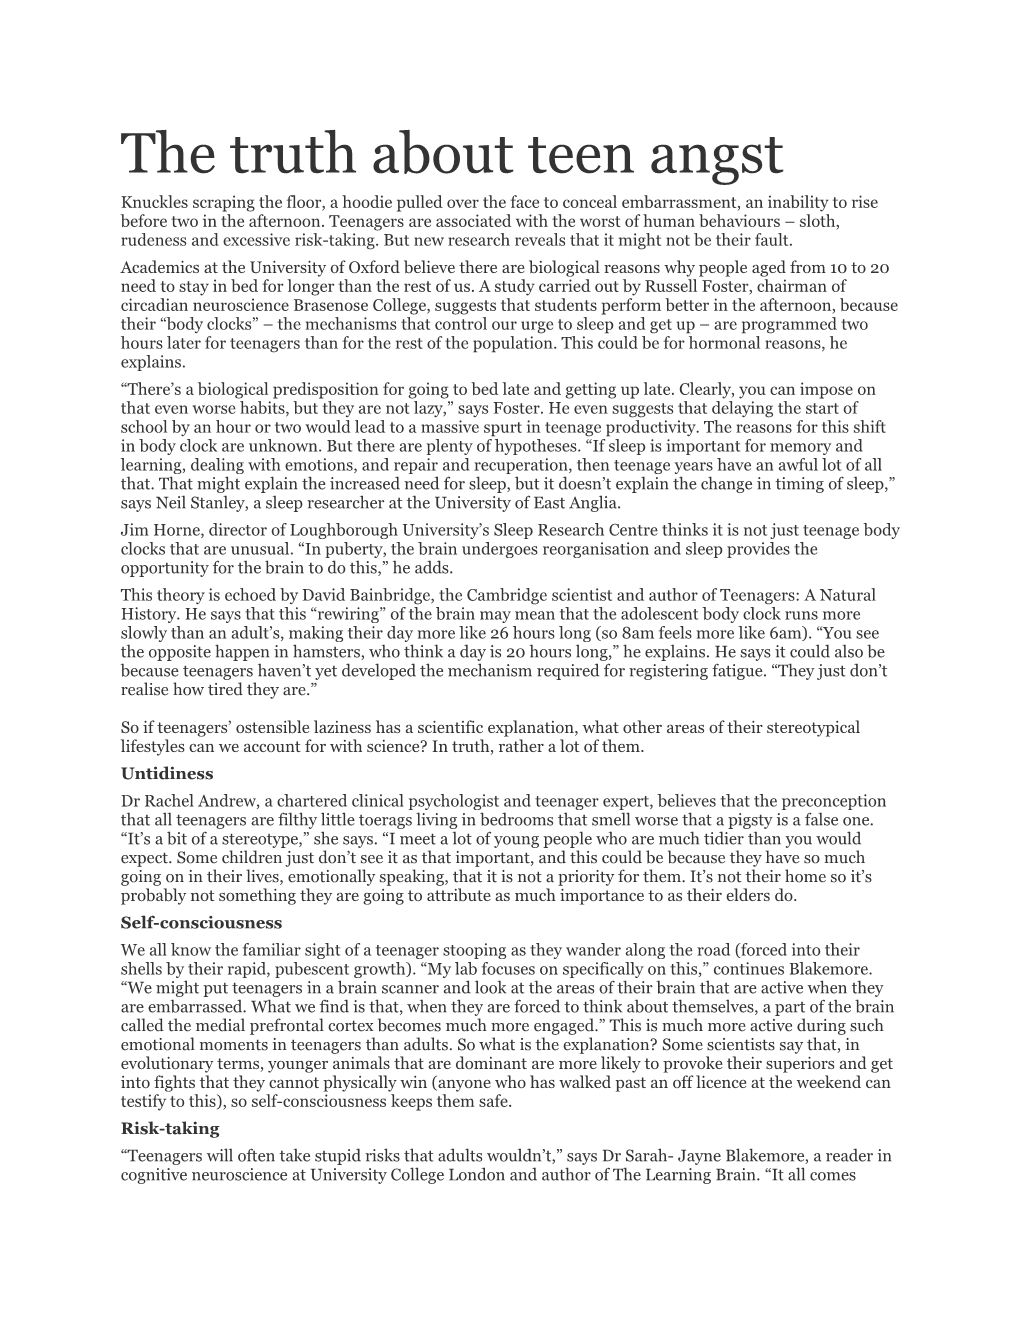 The Truth About Teen Angst